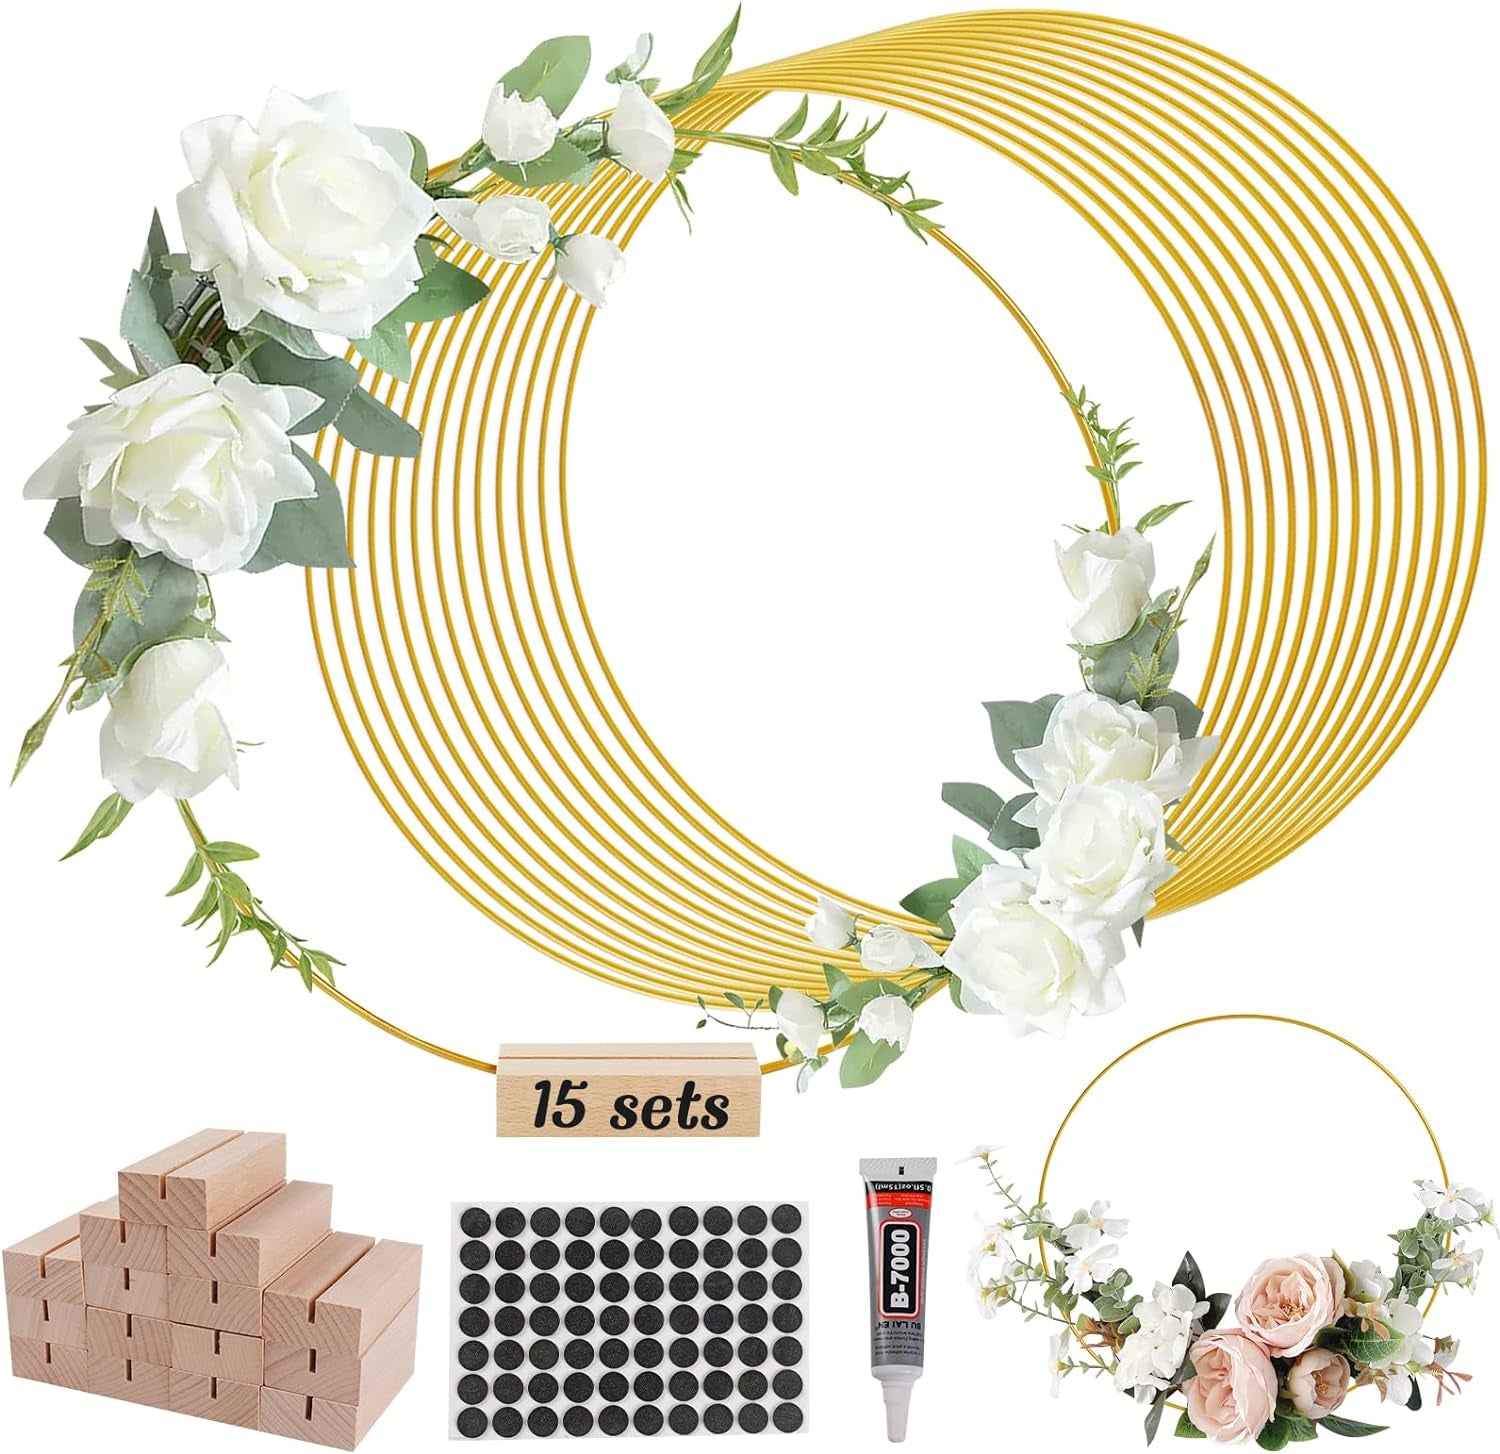 15 Pcs 12Inch Metal Floral Hoop Wreath Centerpiece Table Decorations with 15 Pcs Place Card Holders, Gold Craft Hoop Rings for DIY Wedding Decorations, Wall Hanging Crafts, and Dream Catchers